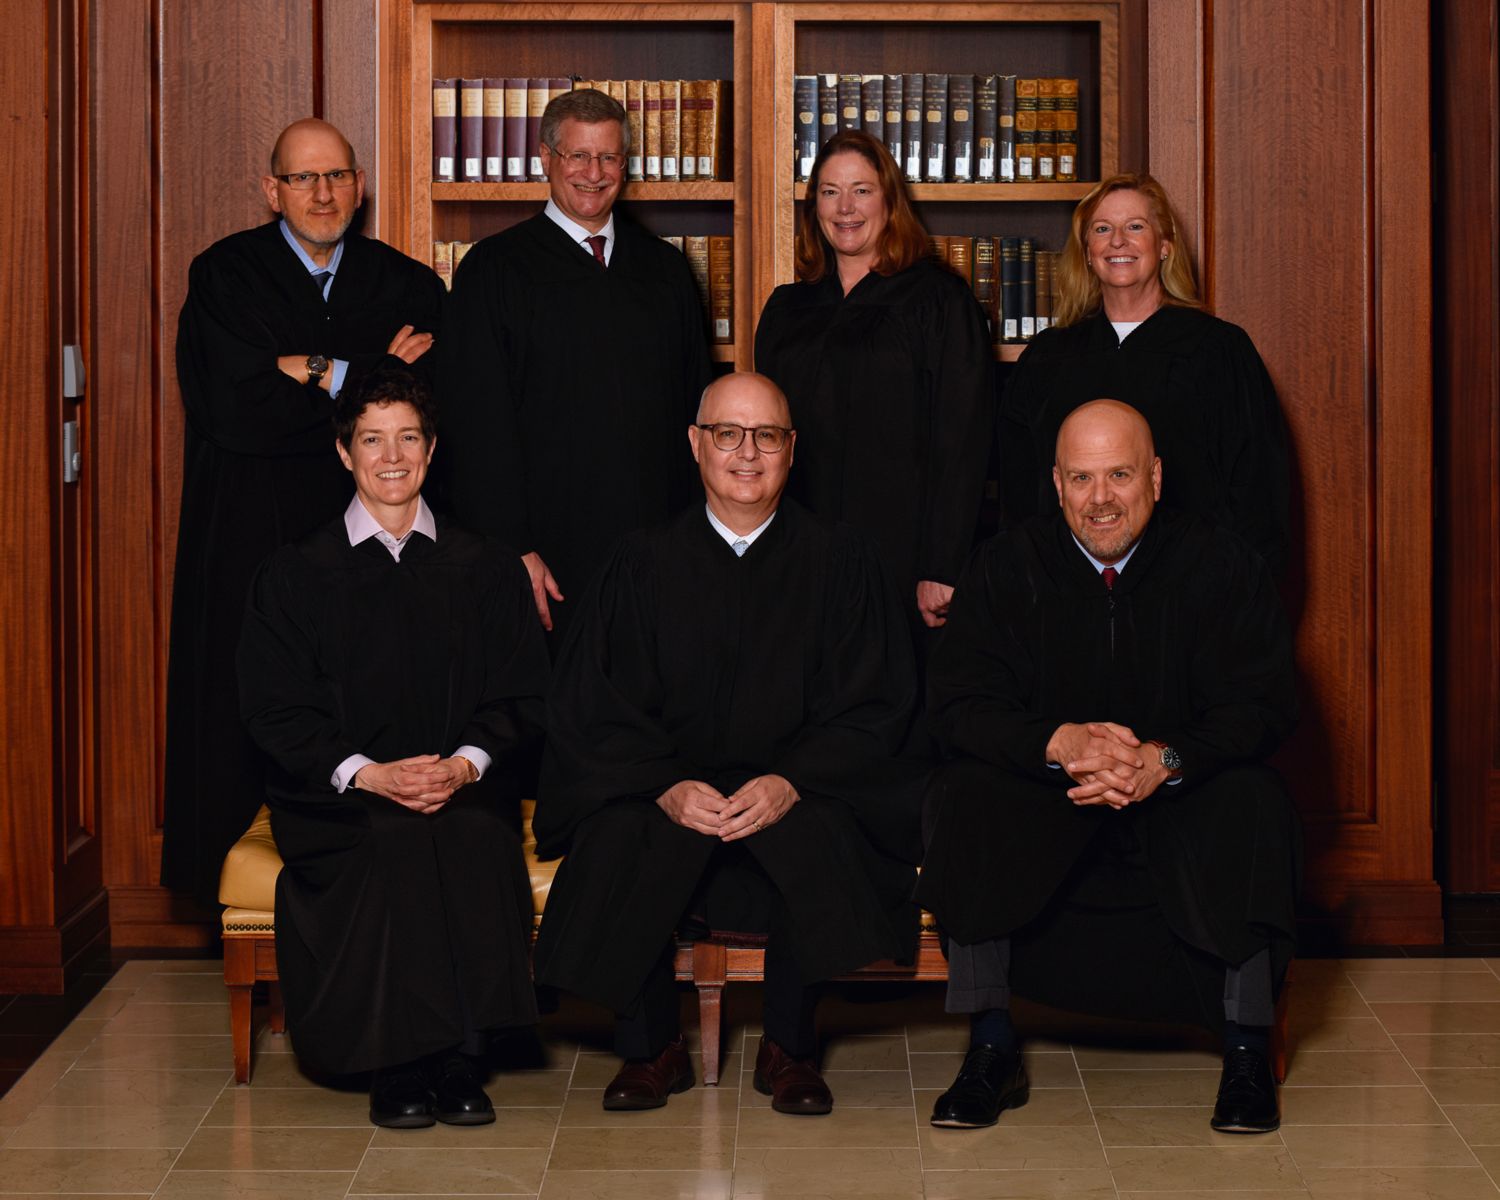 Justices of the Colorado Supreme Court